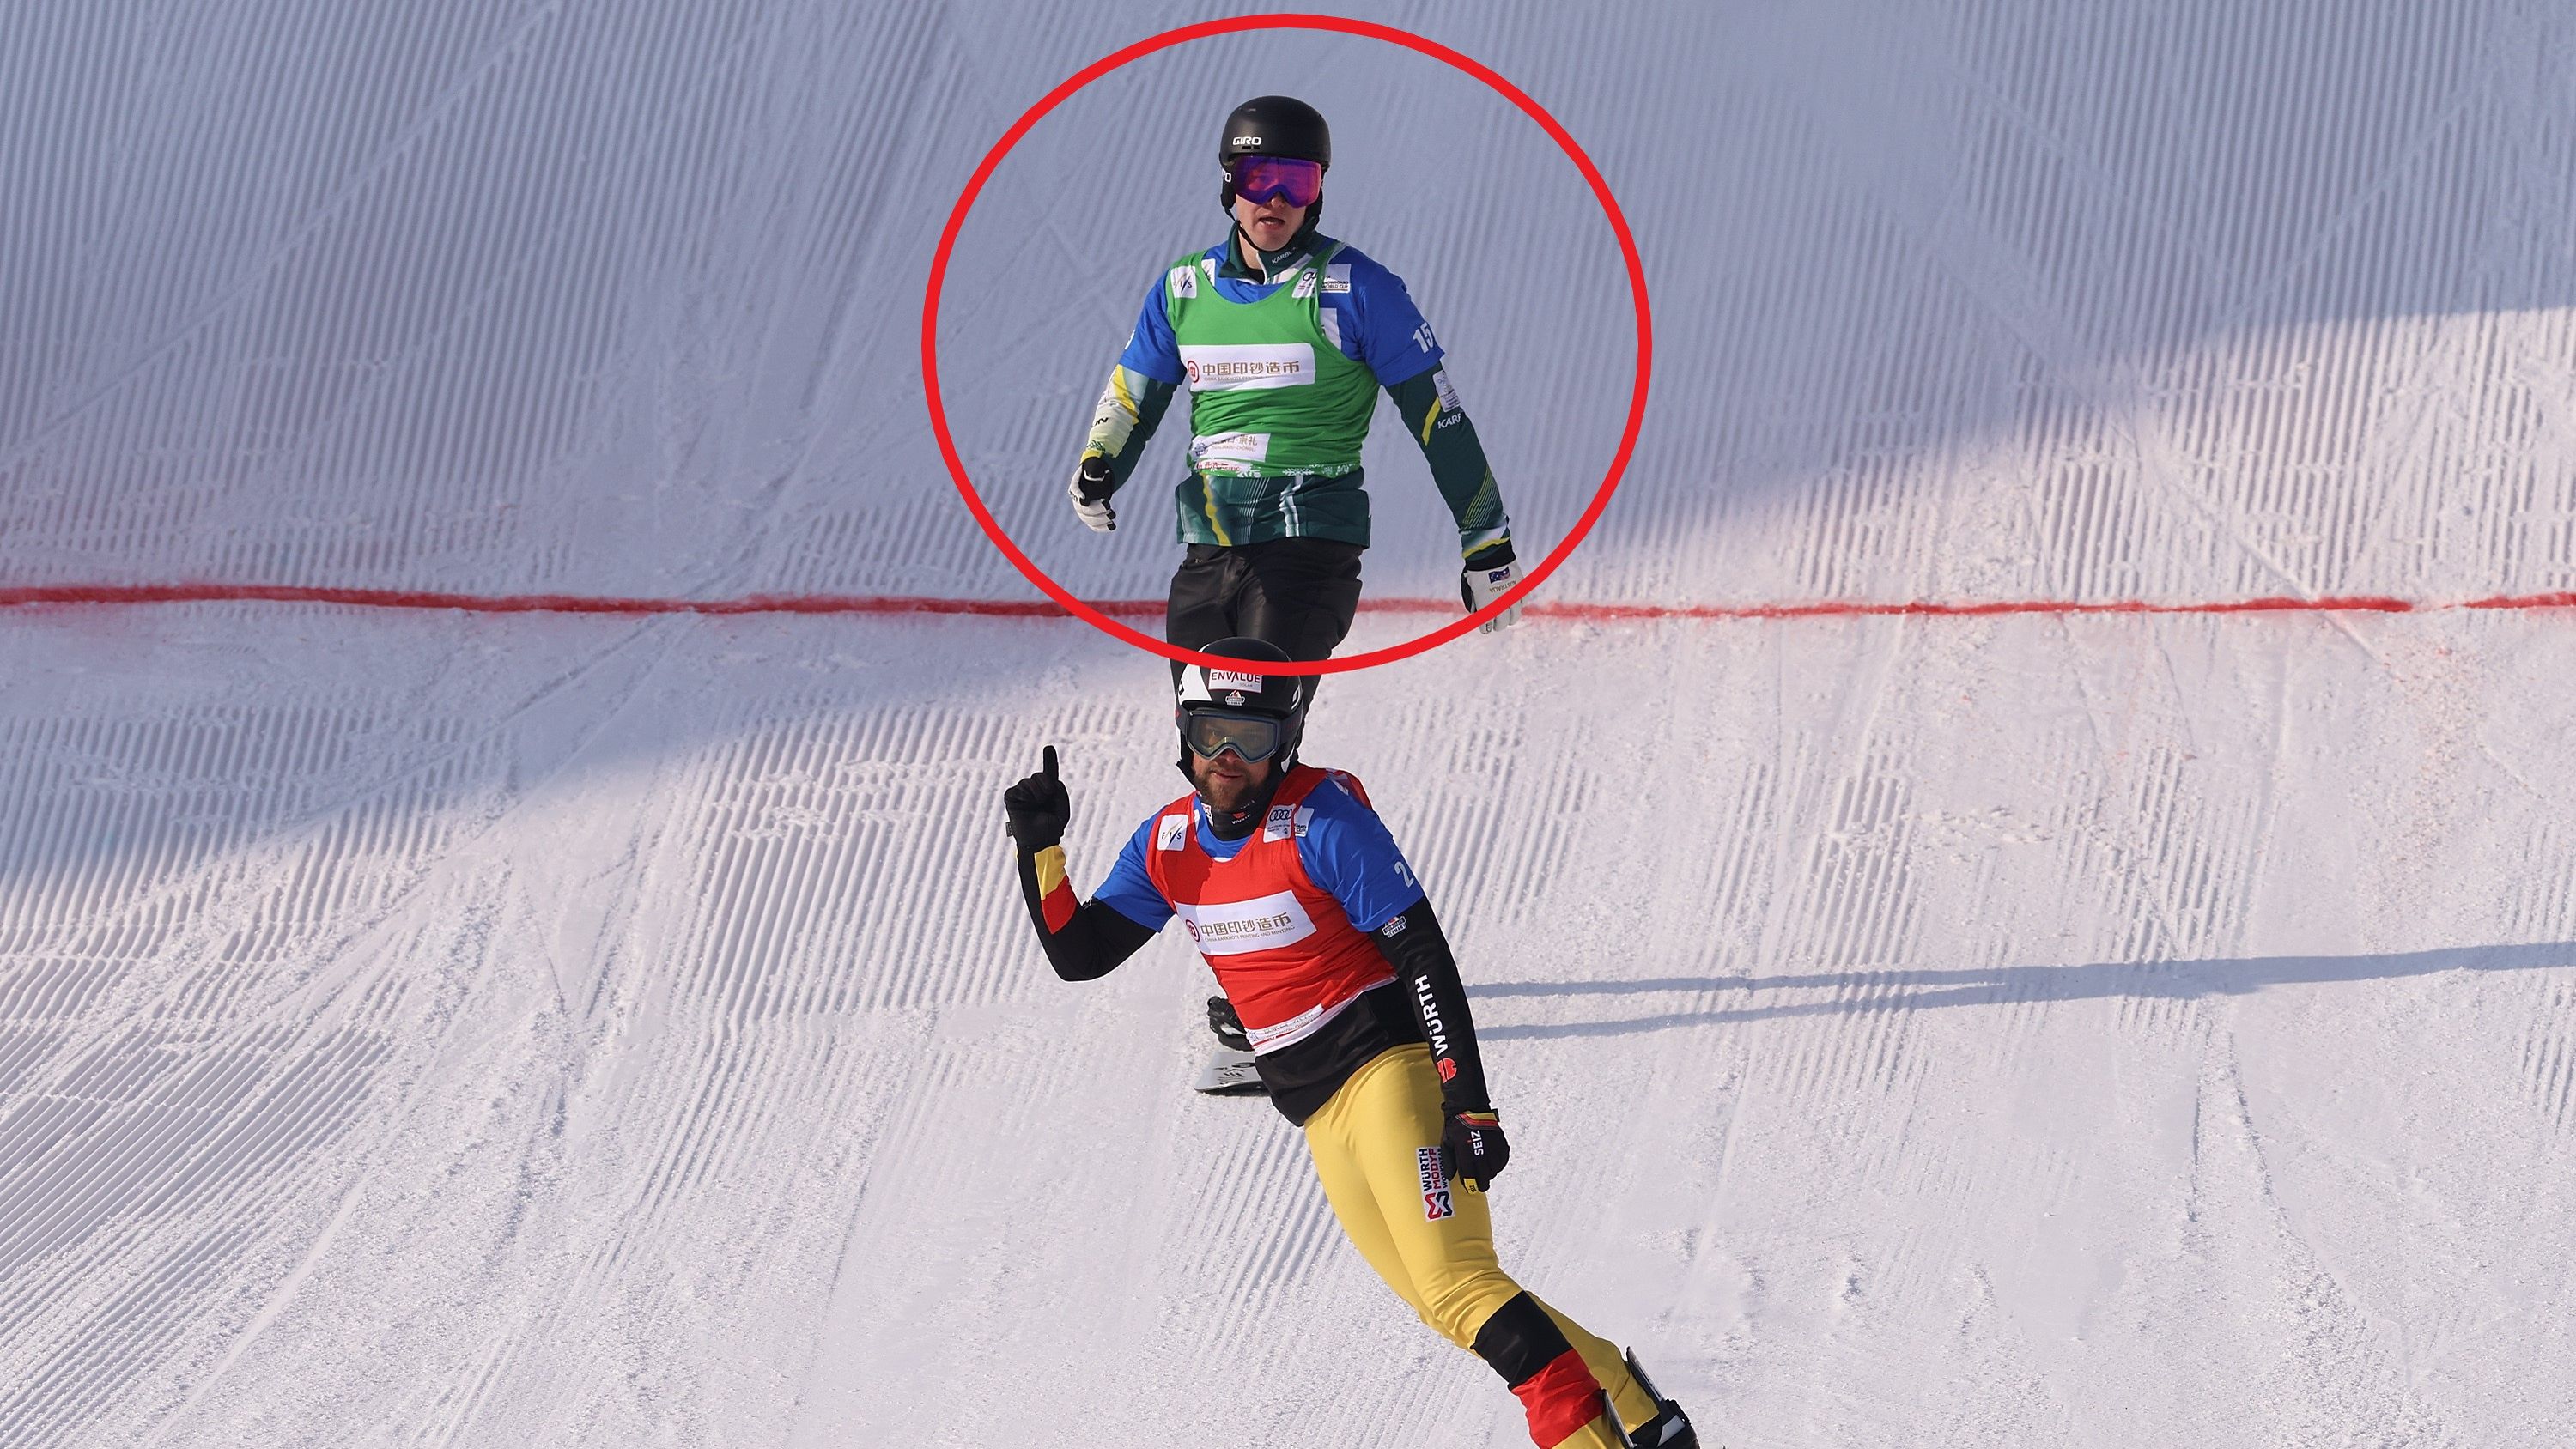 Aussie snowboarder Jarryd Hughes breaks down after missing another Olympics medal